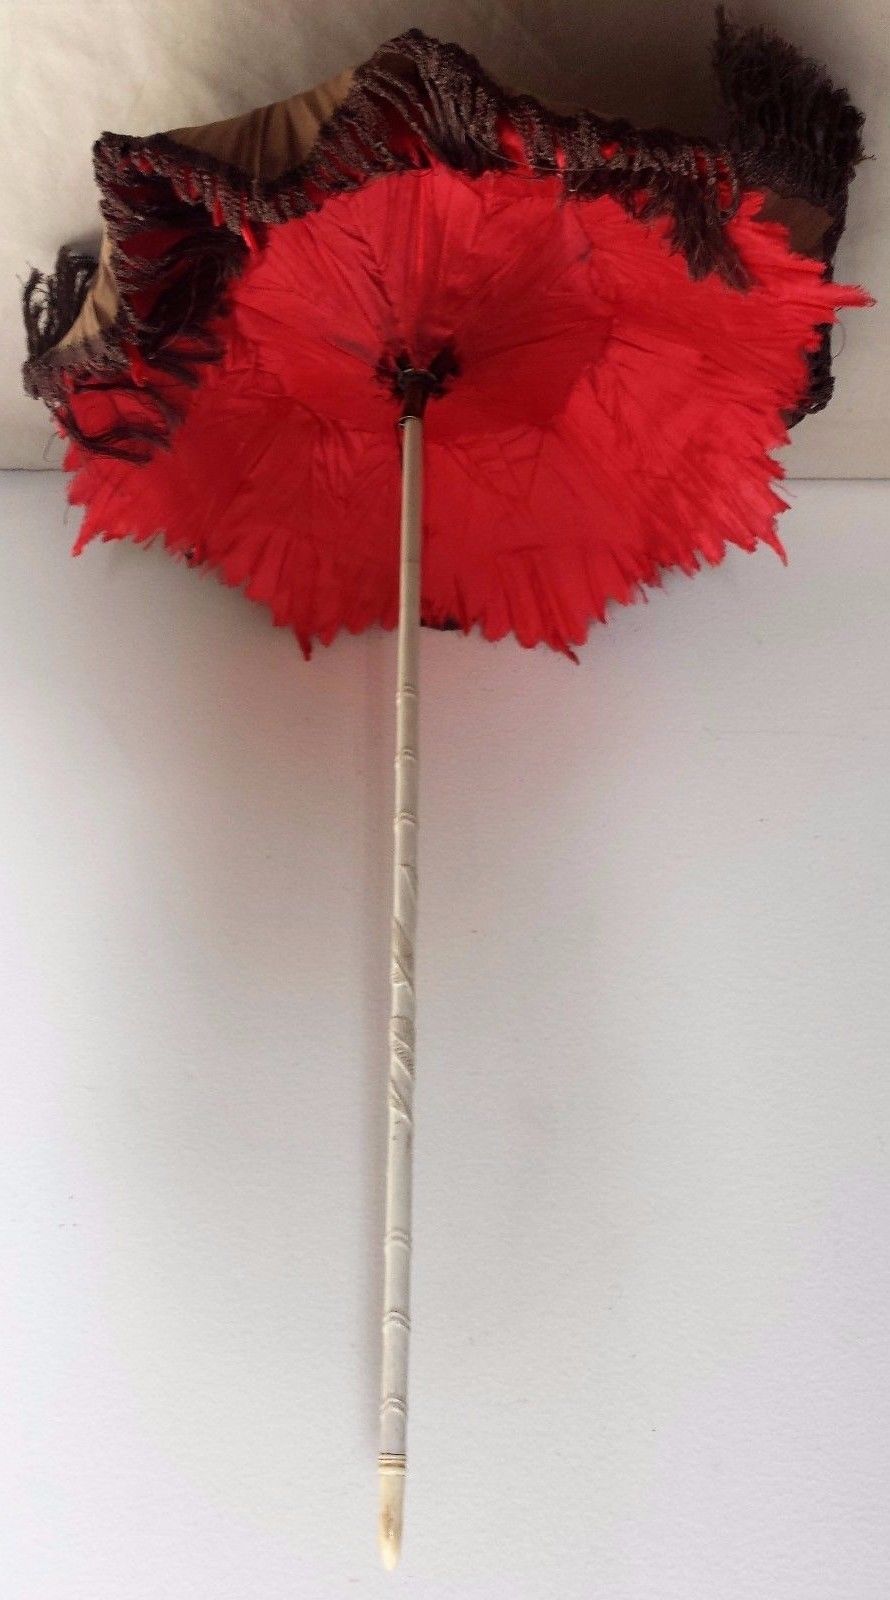 ANTIQUE VICTORIAN DOLLS PARASOL WITH SILK SHADE - WONDERFUL CARVING WORK